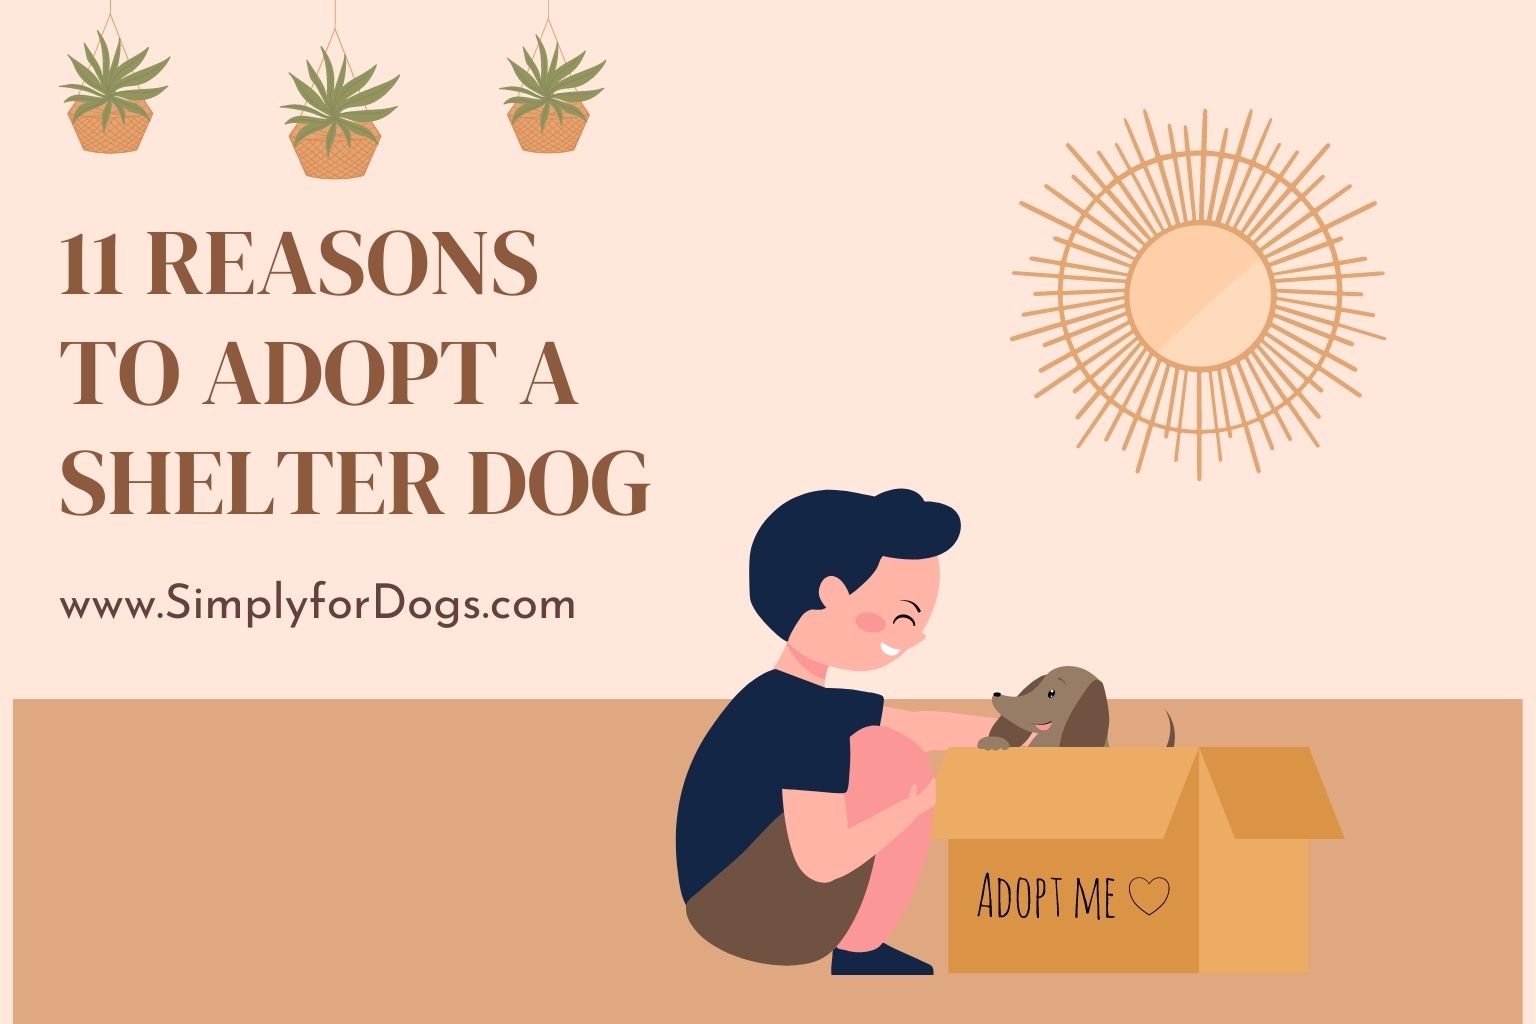 11 Reasons to Adopt a Shelter Dog